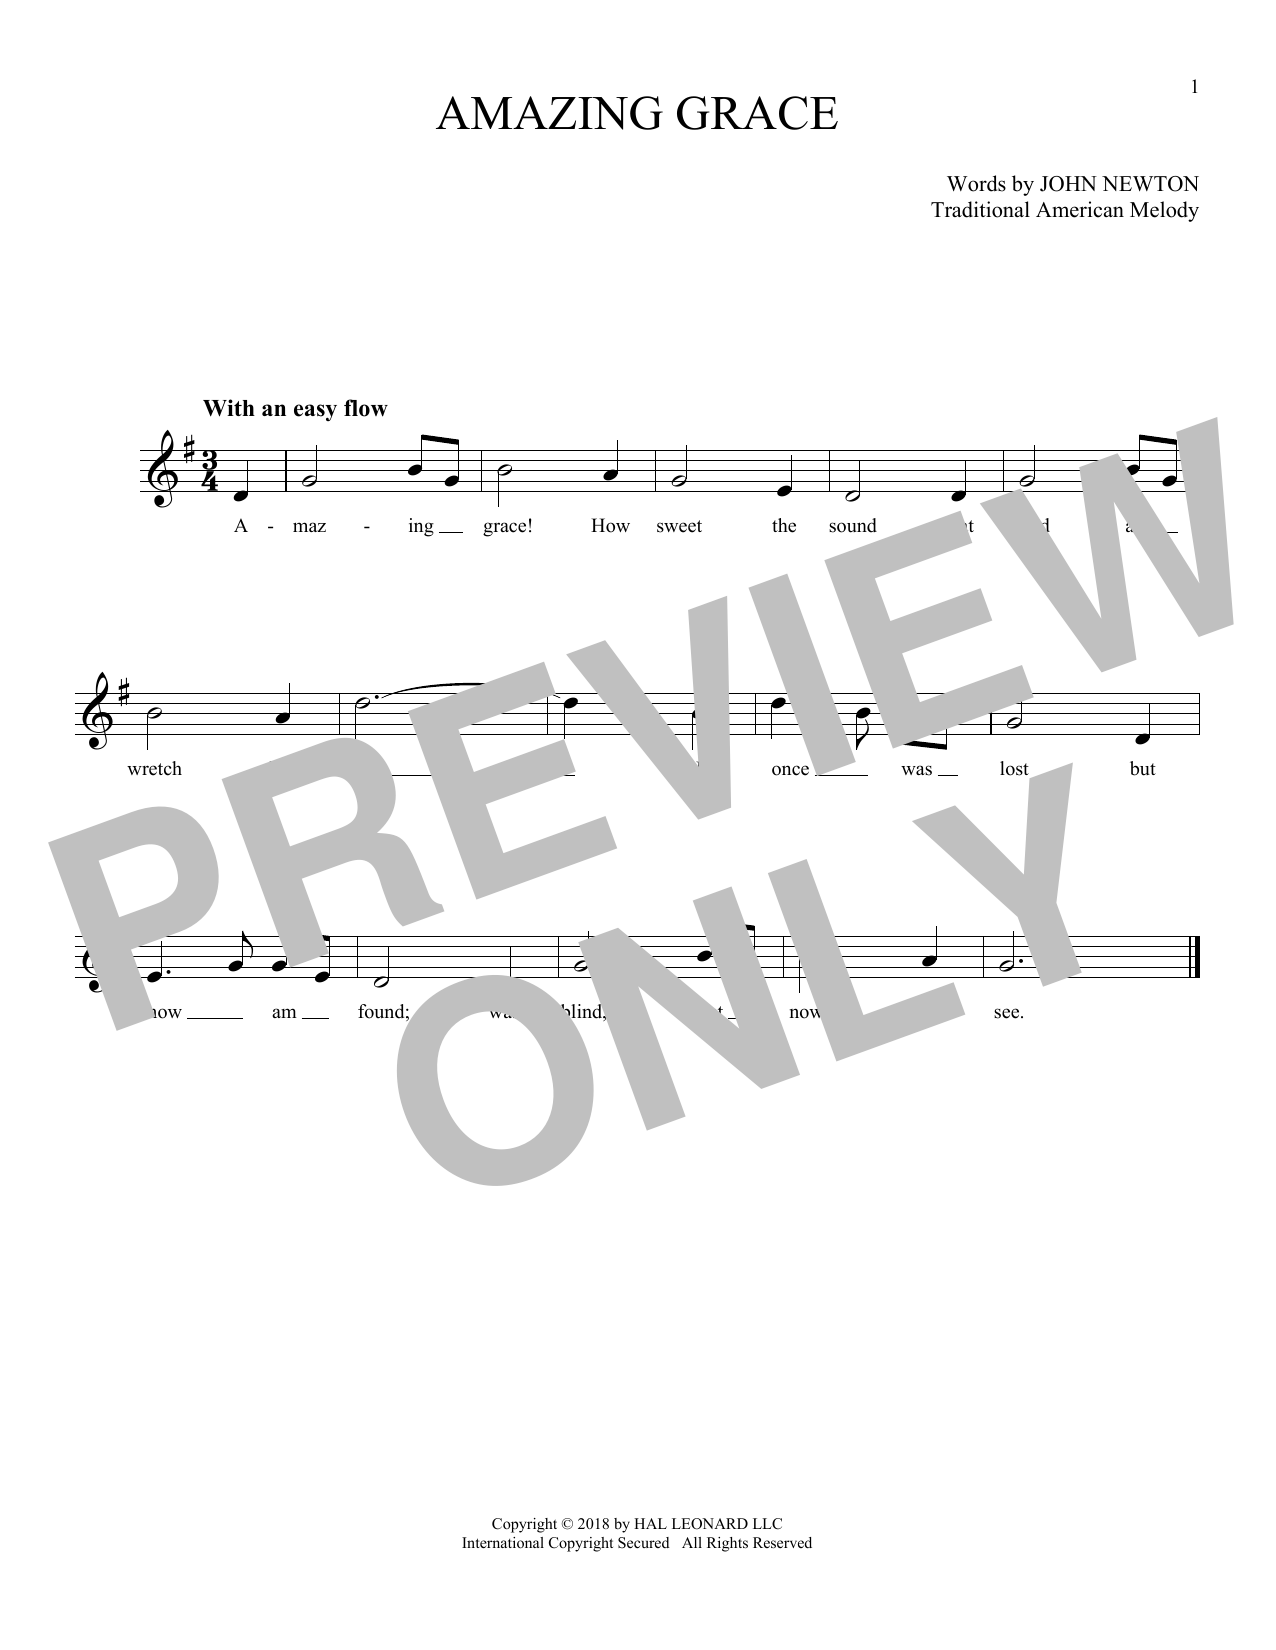 Download Traditional American Melody Amazing Grace Sheet Music